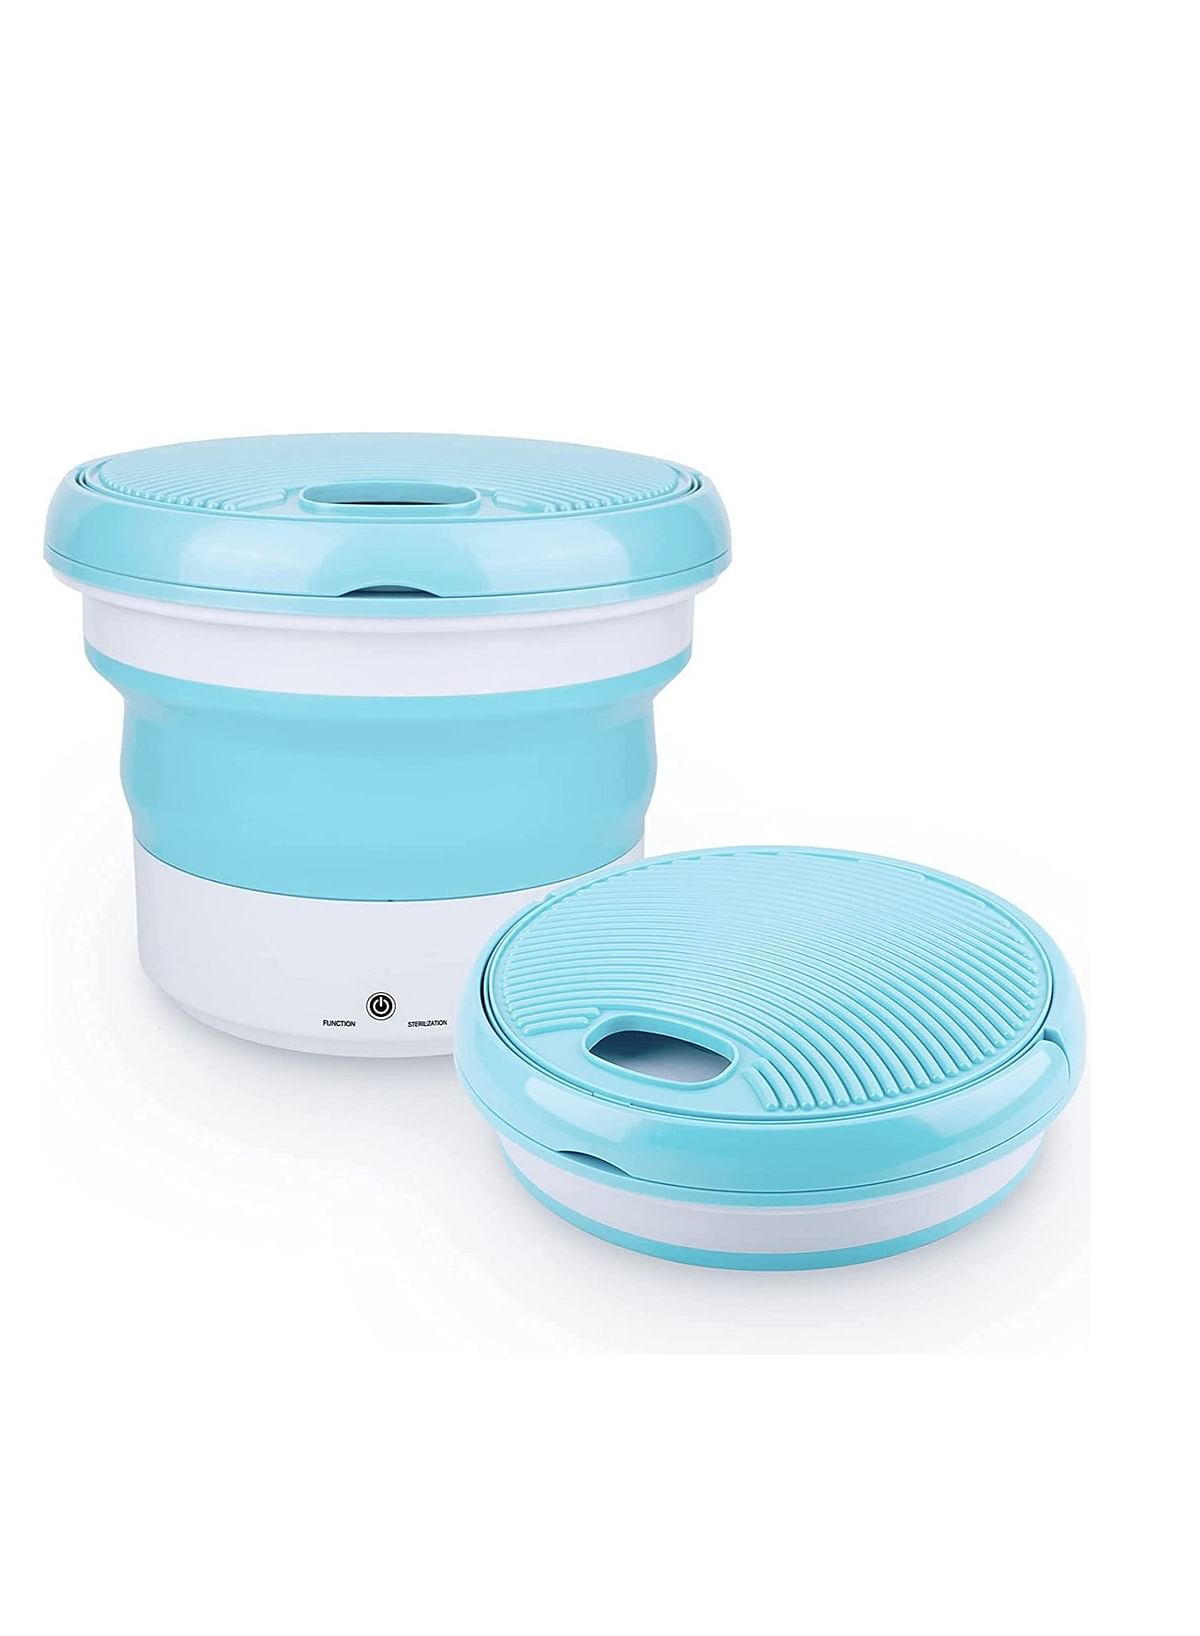 Portable Mini Washing Machine Folding Cloth Washing Machine, Small Foldable Bucket Washer Lightweight Convenient Washer for Wash Baby Clothes